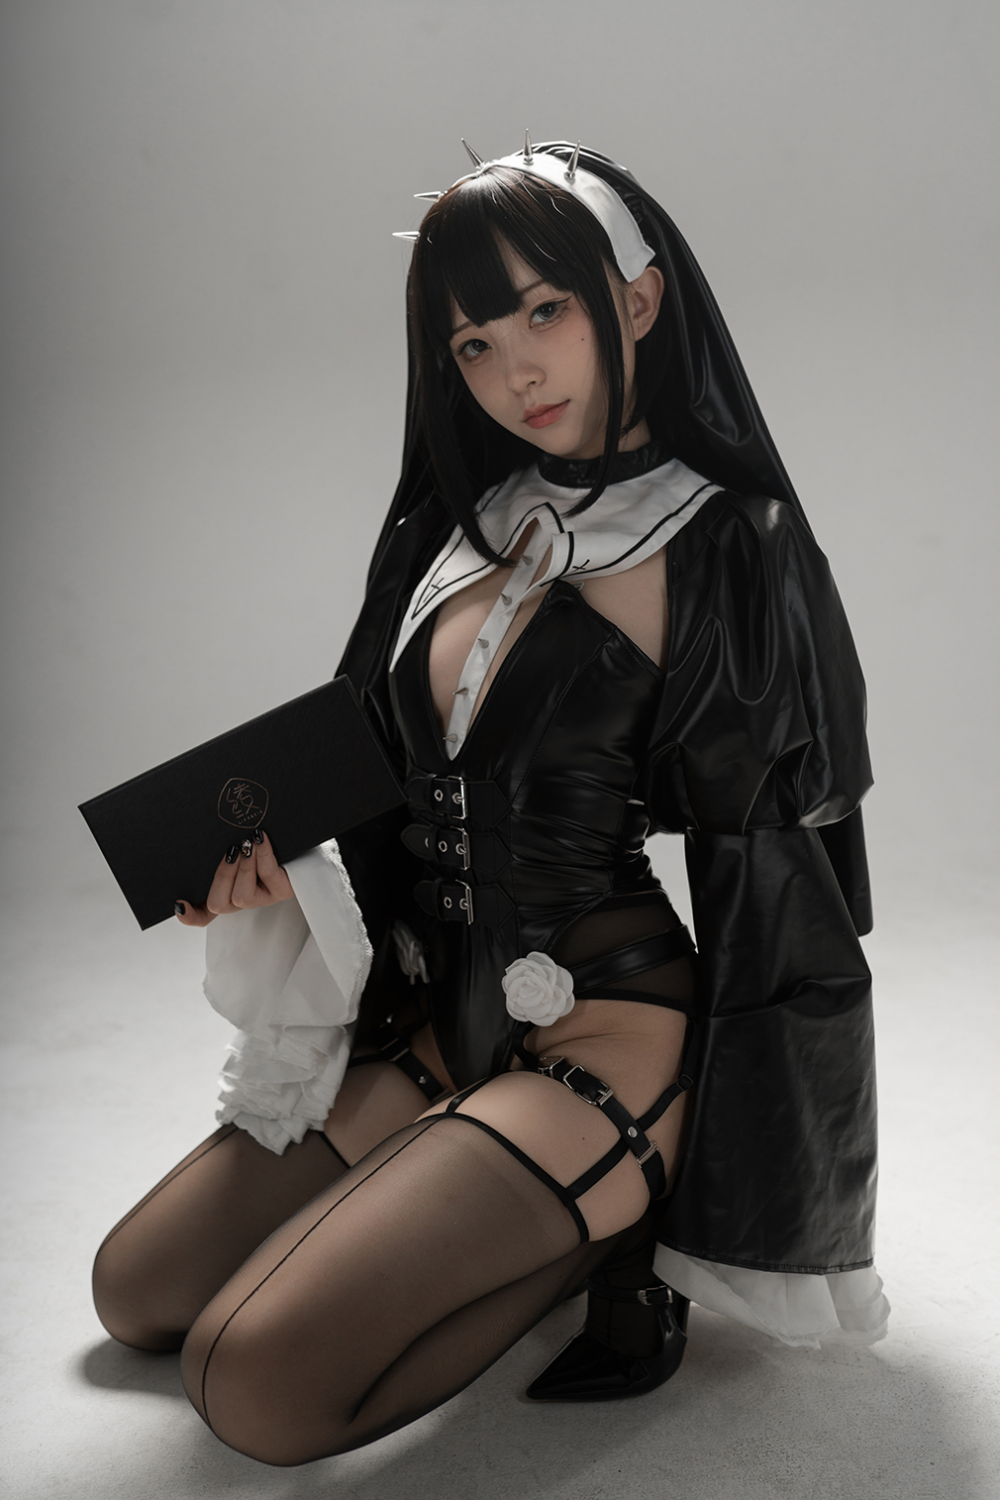 Anime Girls Cosplay Porn - Cosplay Anime Asian Girl with Hot Lingerie - Porn - EroMe